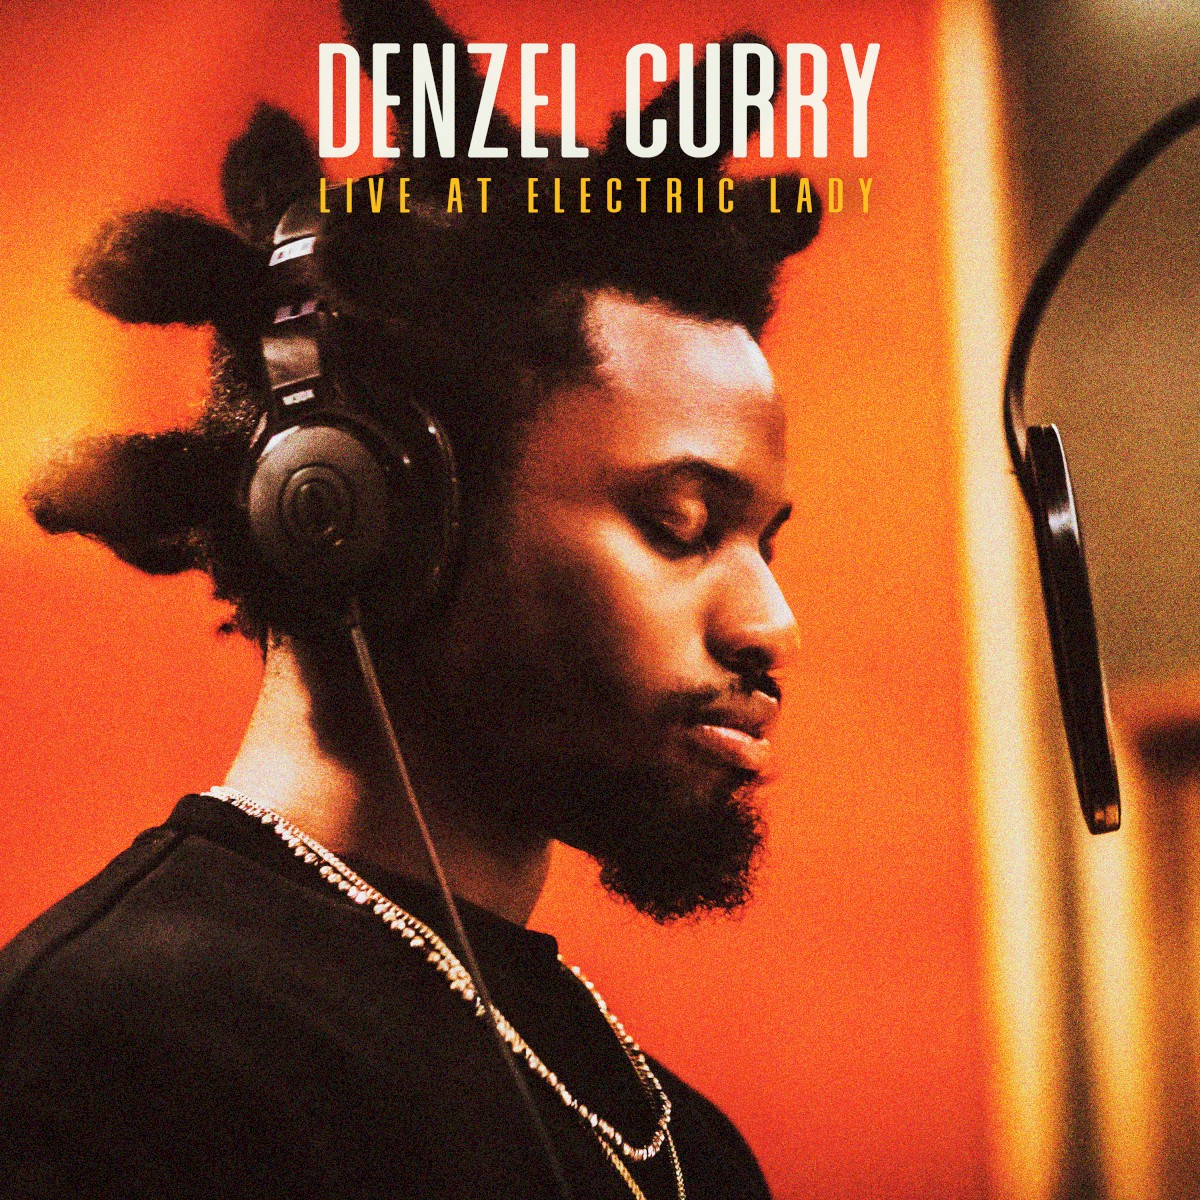 Release “Live At Electric Lady” by Denzel Curry - Cover Art - MusicBrainz